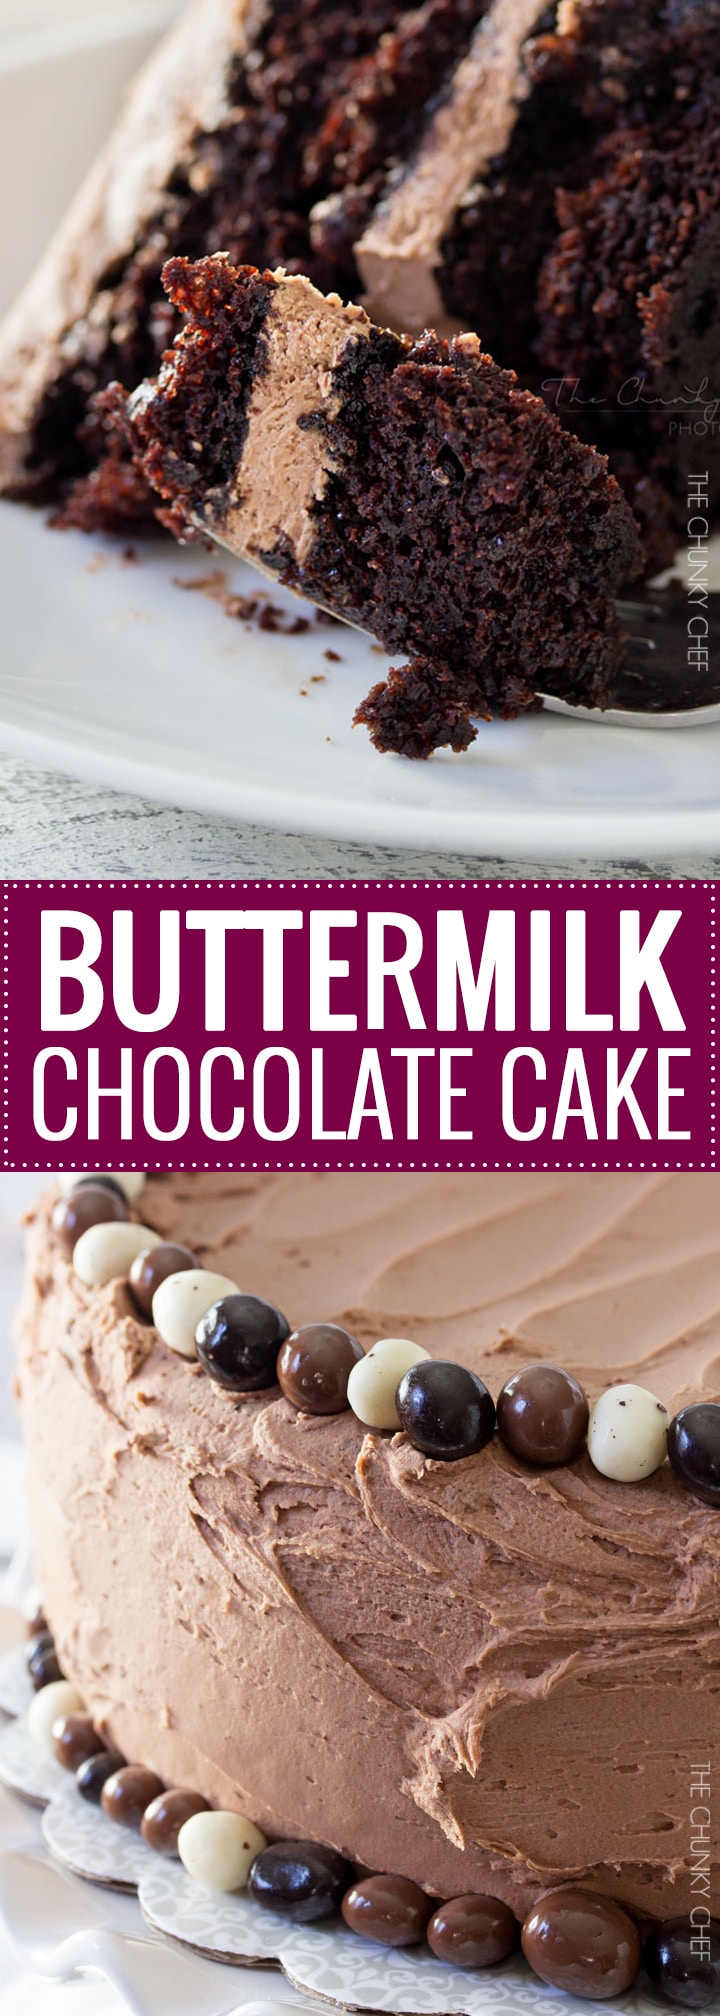 Buttermilk Chocolate Layer Cake | The ULTIMATE soft and fluffy chocolate layer cake.  Made from scratch with buttermilk, and slathered in an ultra creamy buttercream frosting! | http://thechunkychef.com